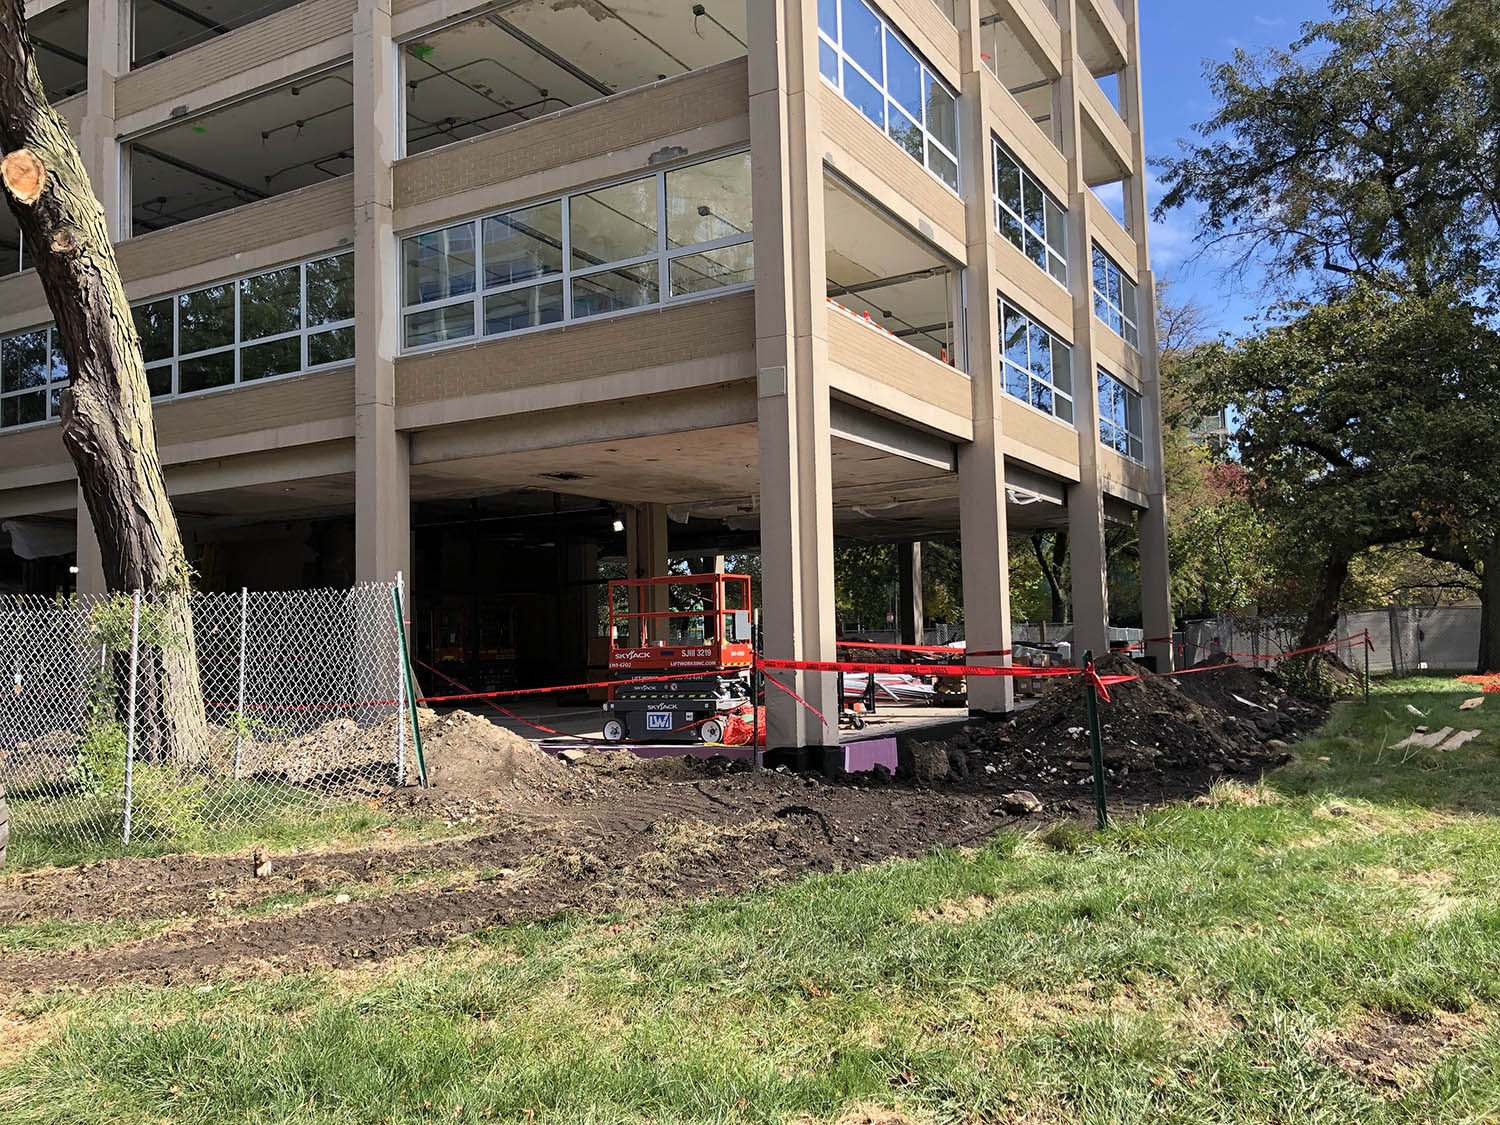 View of Exterior Ground Work at Cunningham Hall. Image by Lukas Kugler